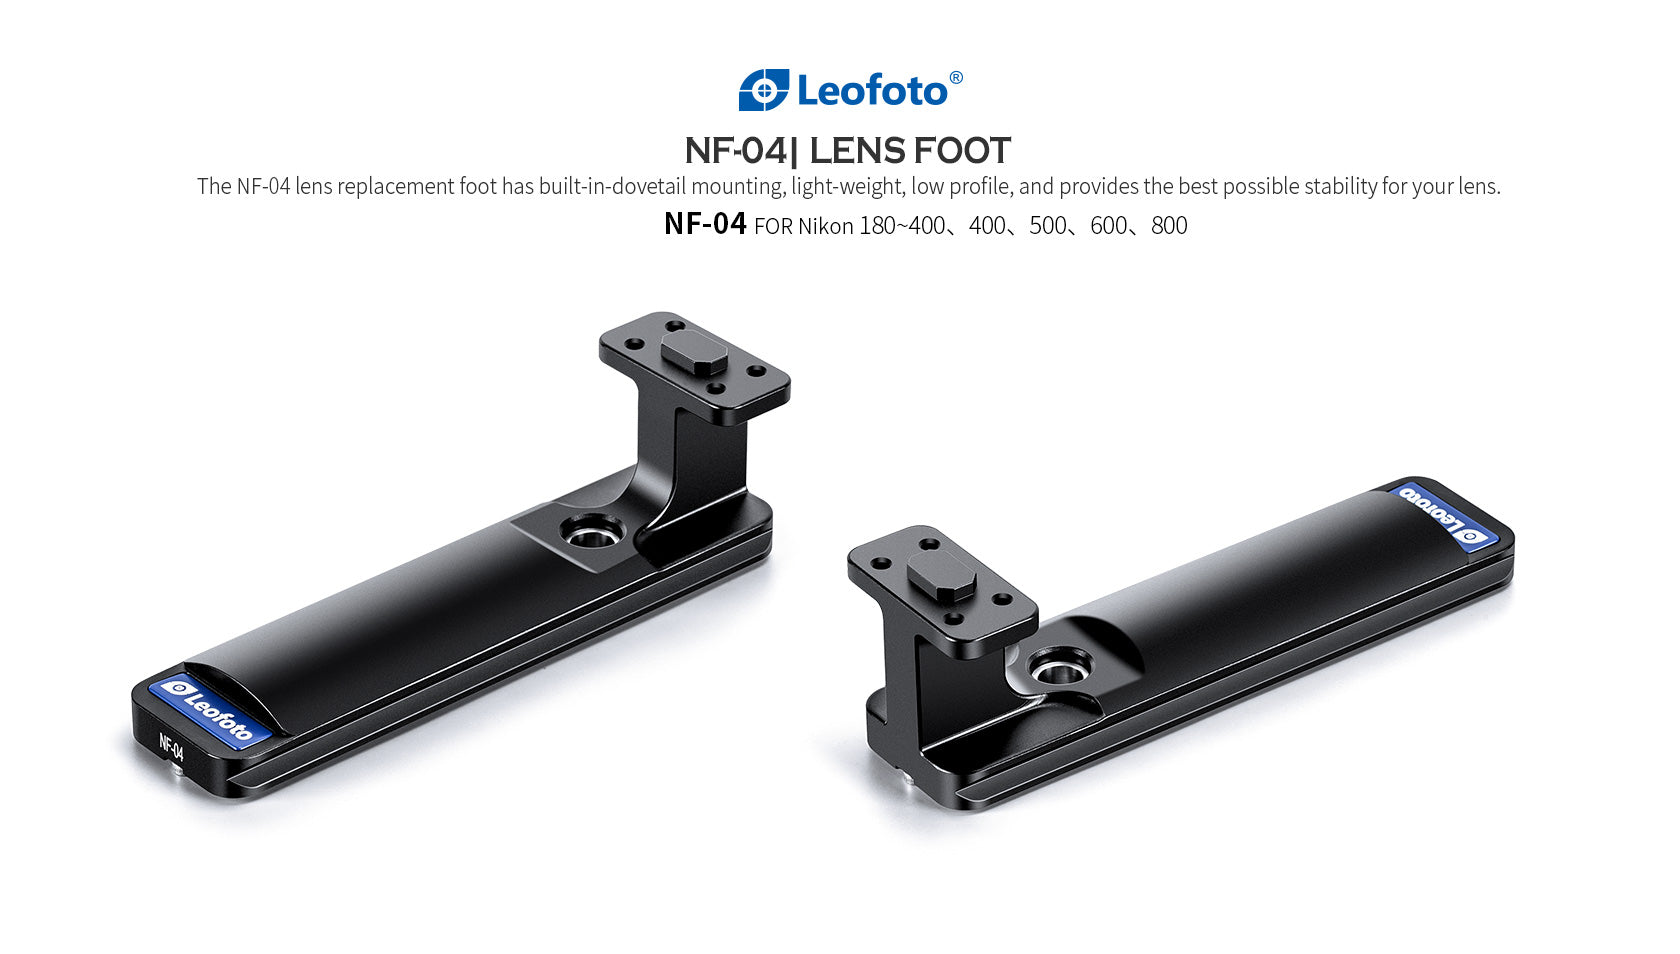 Leofoto NF-04 Replacement Foot for NIKON AFS 180~400, 400, 500, 600, 800